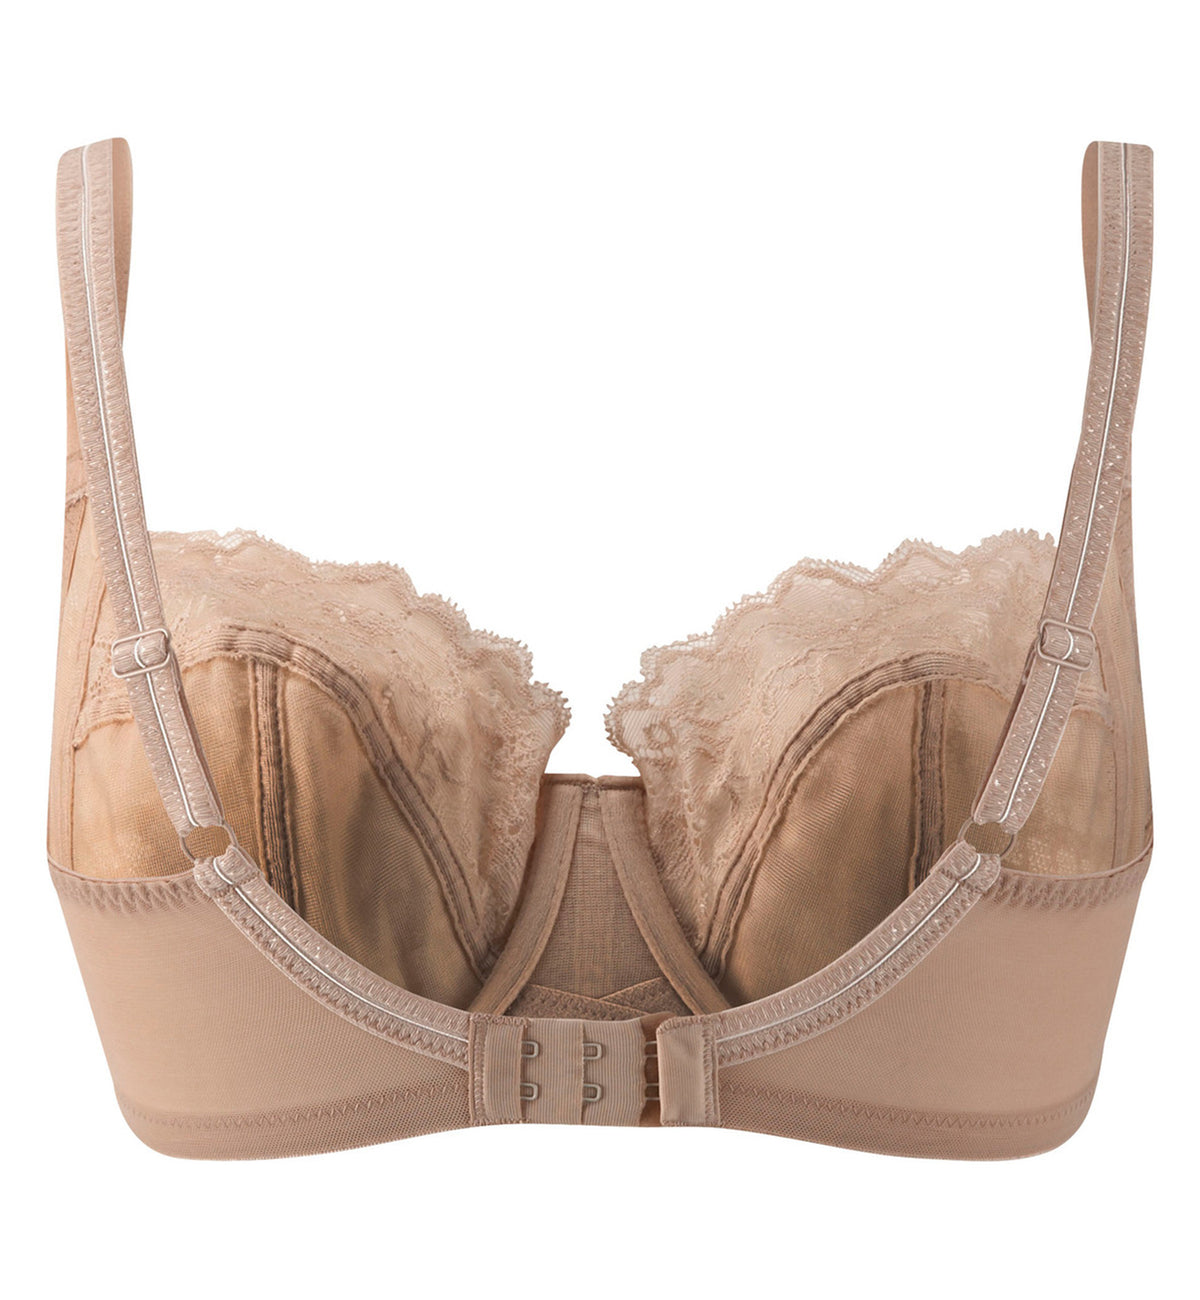 36E Bra Size in G Cup Sizes Nude by Panache Full Cup and Multi